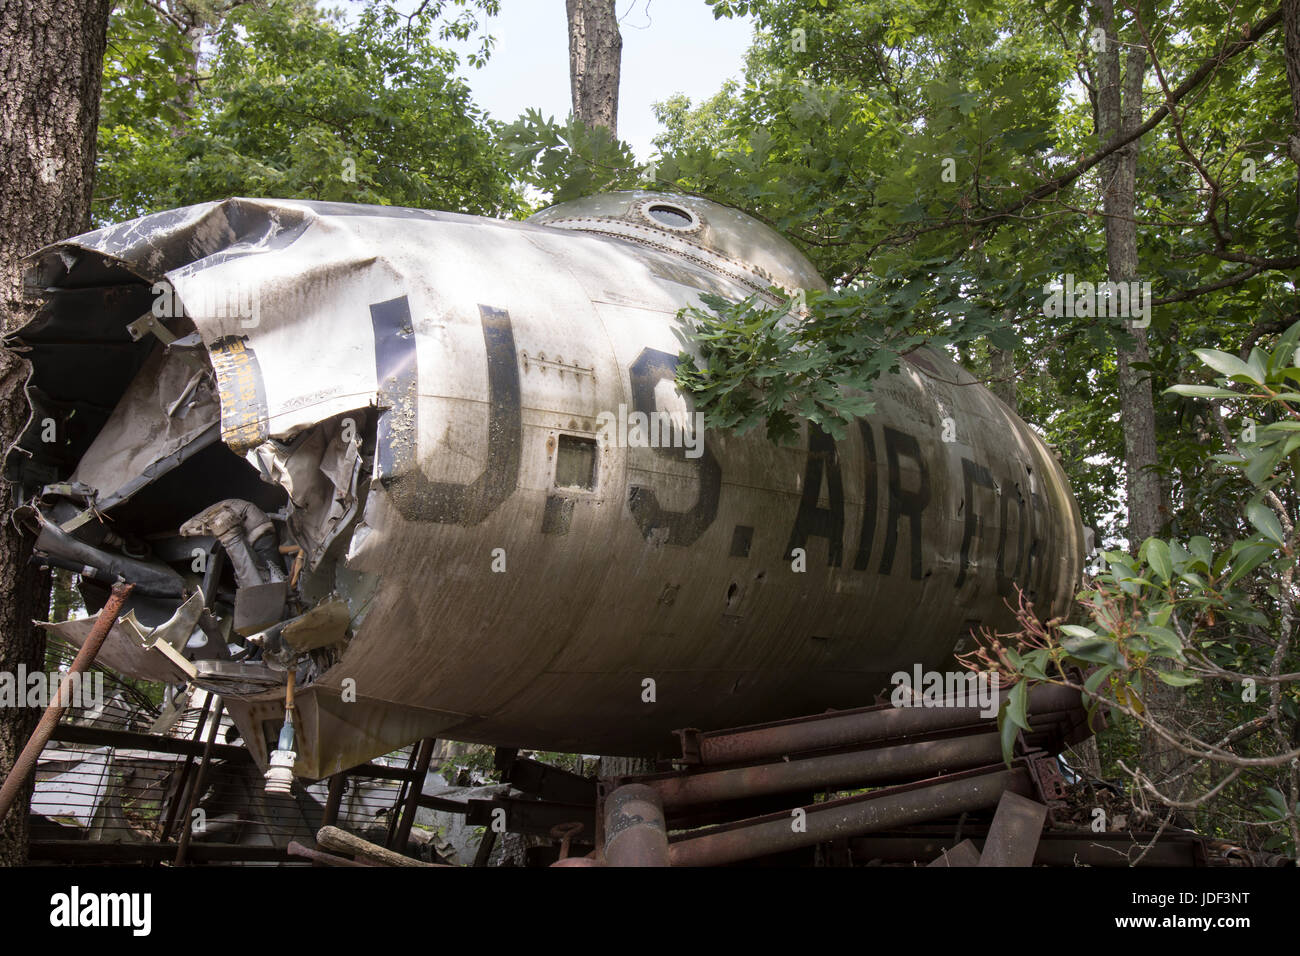 Wreckage of US Air Force fighter jet in trees of junkyard. Stock Photo